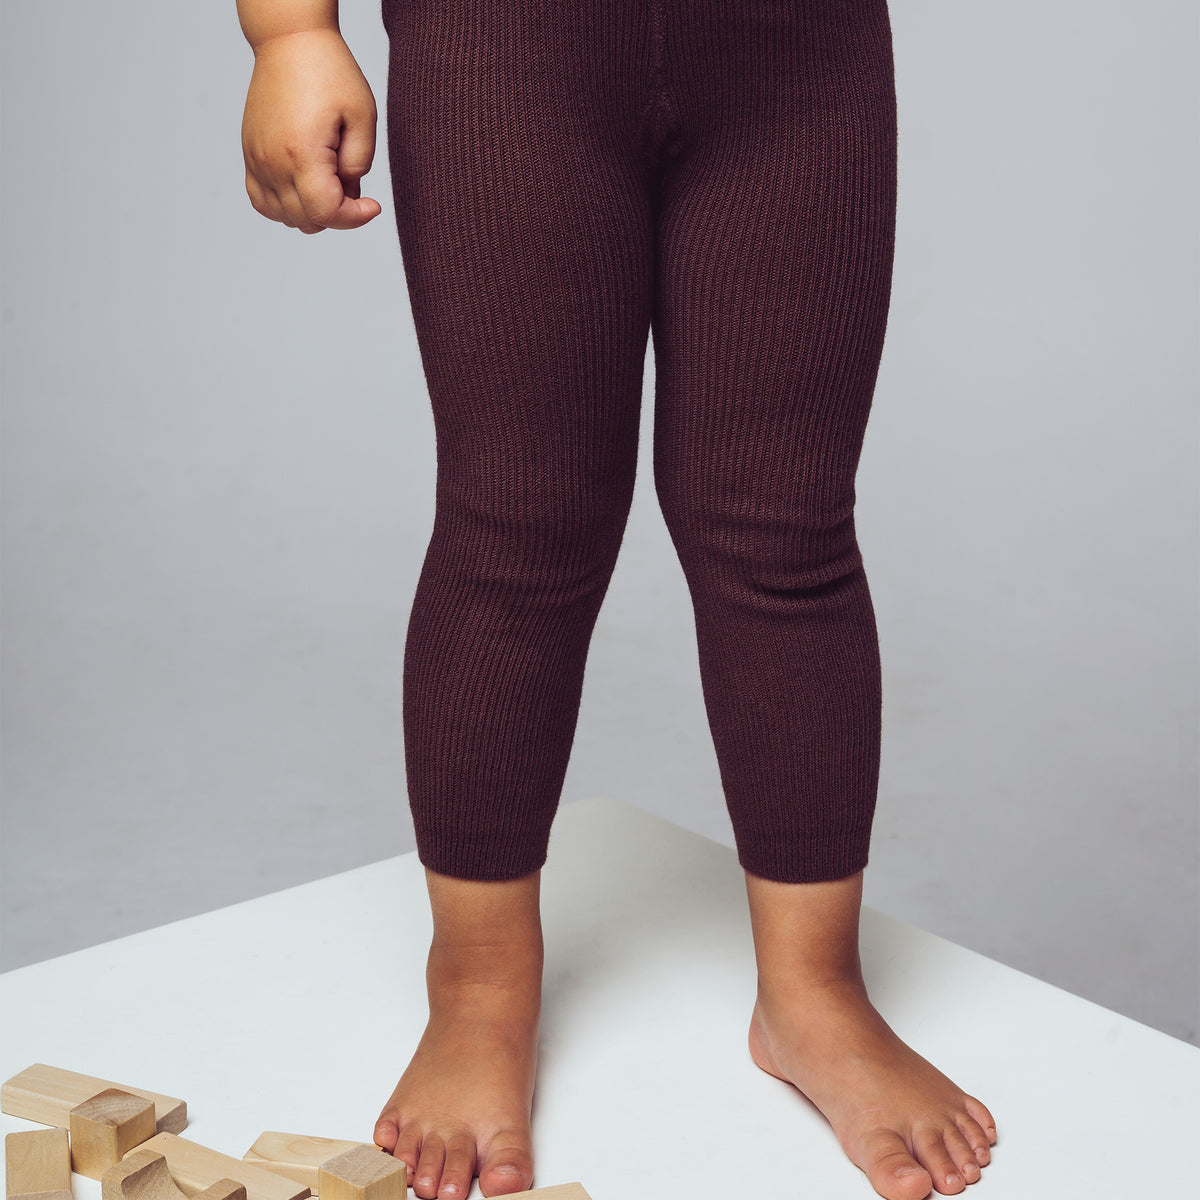 Footless Tights with Braces - Chocolate Brown